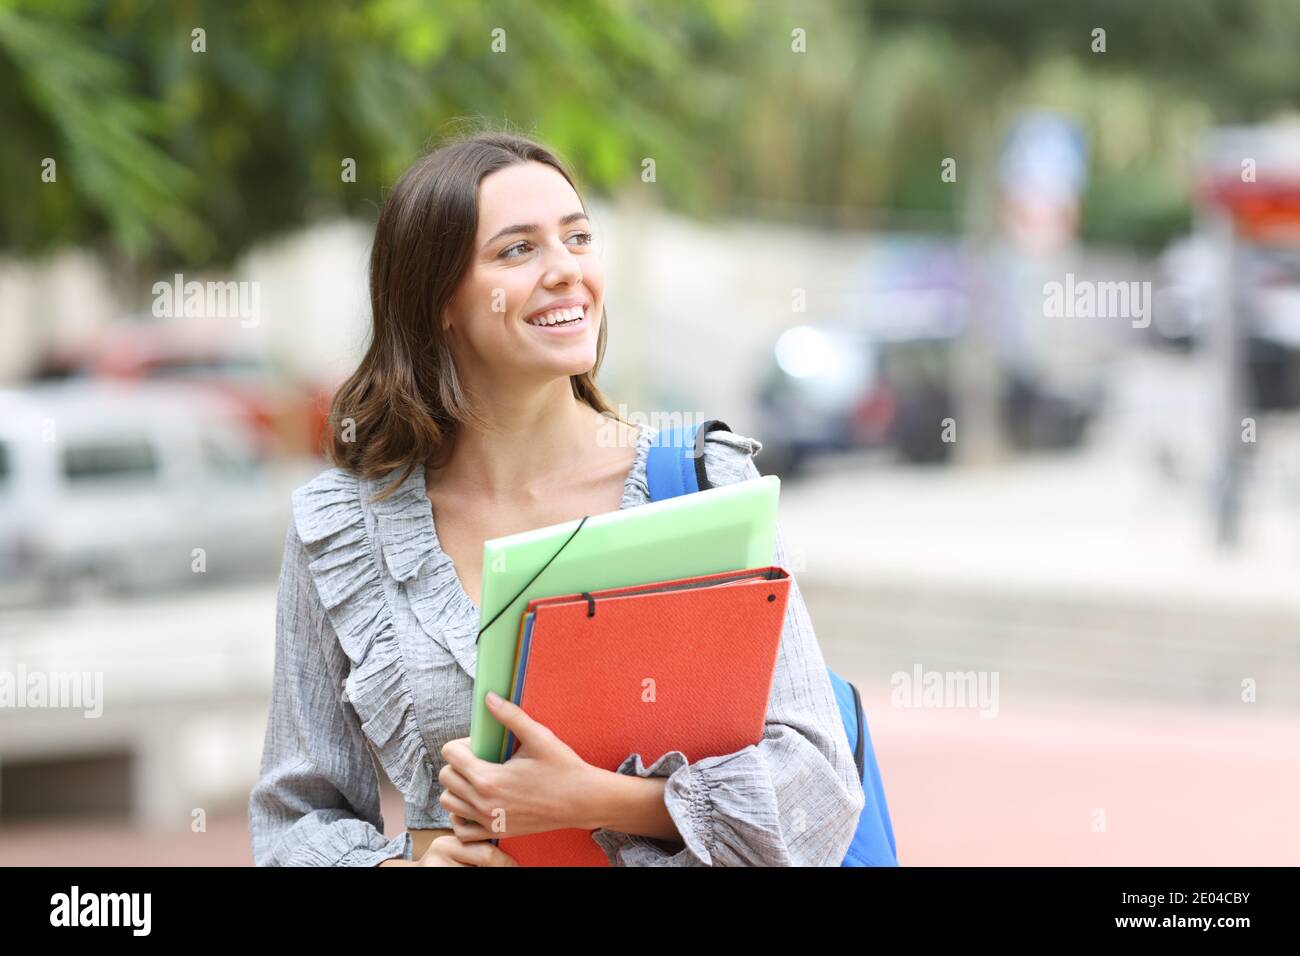 Happy student walking towards camera looking at side in the street Stock Photo